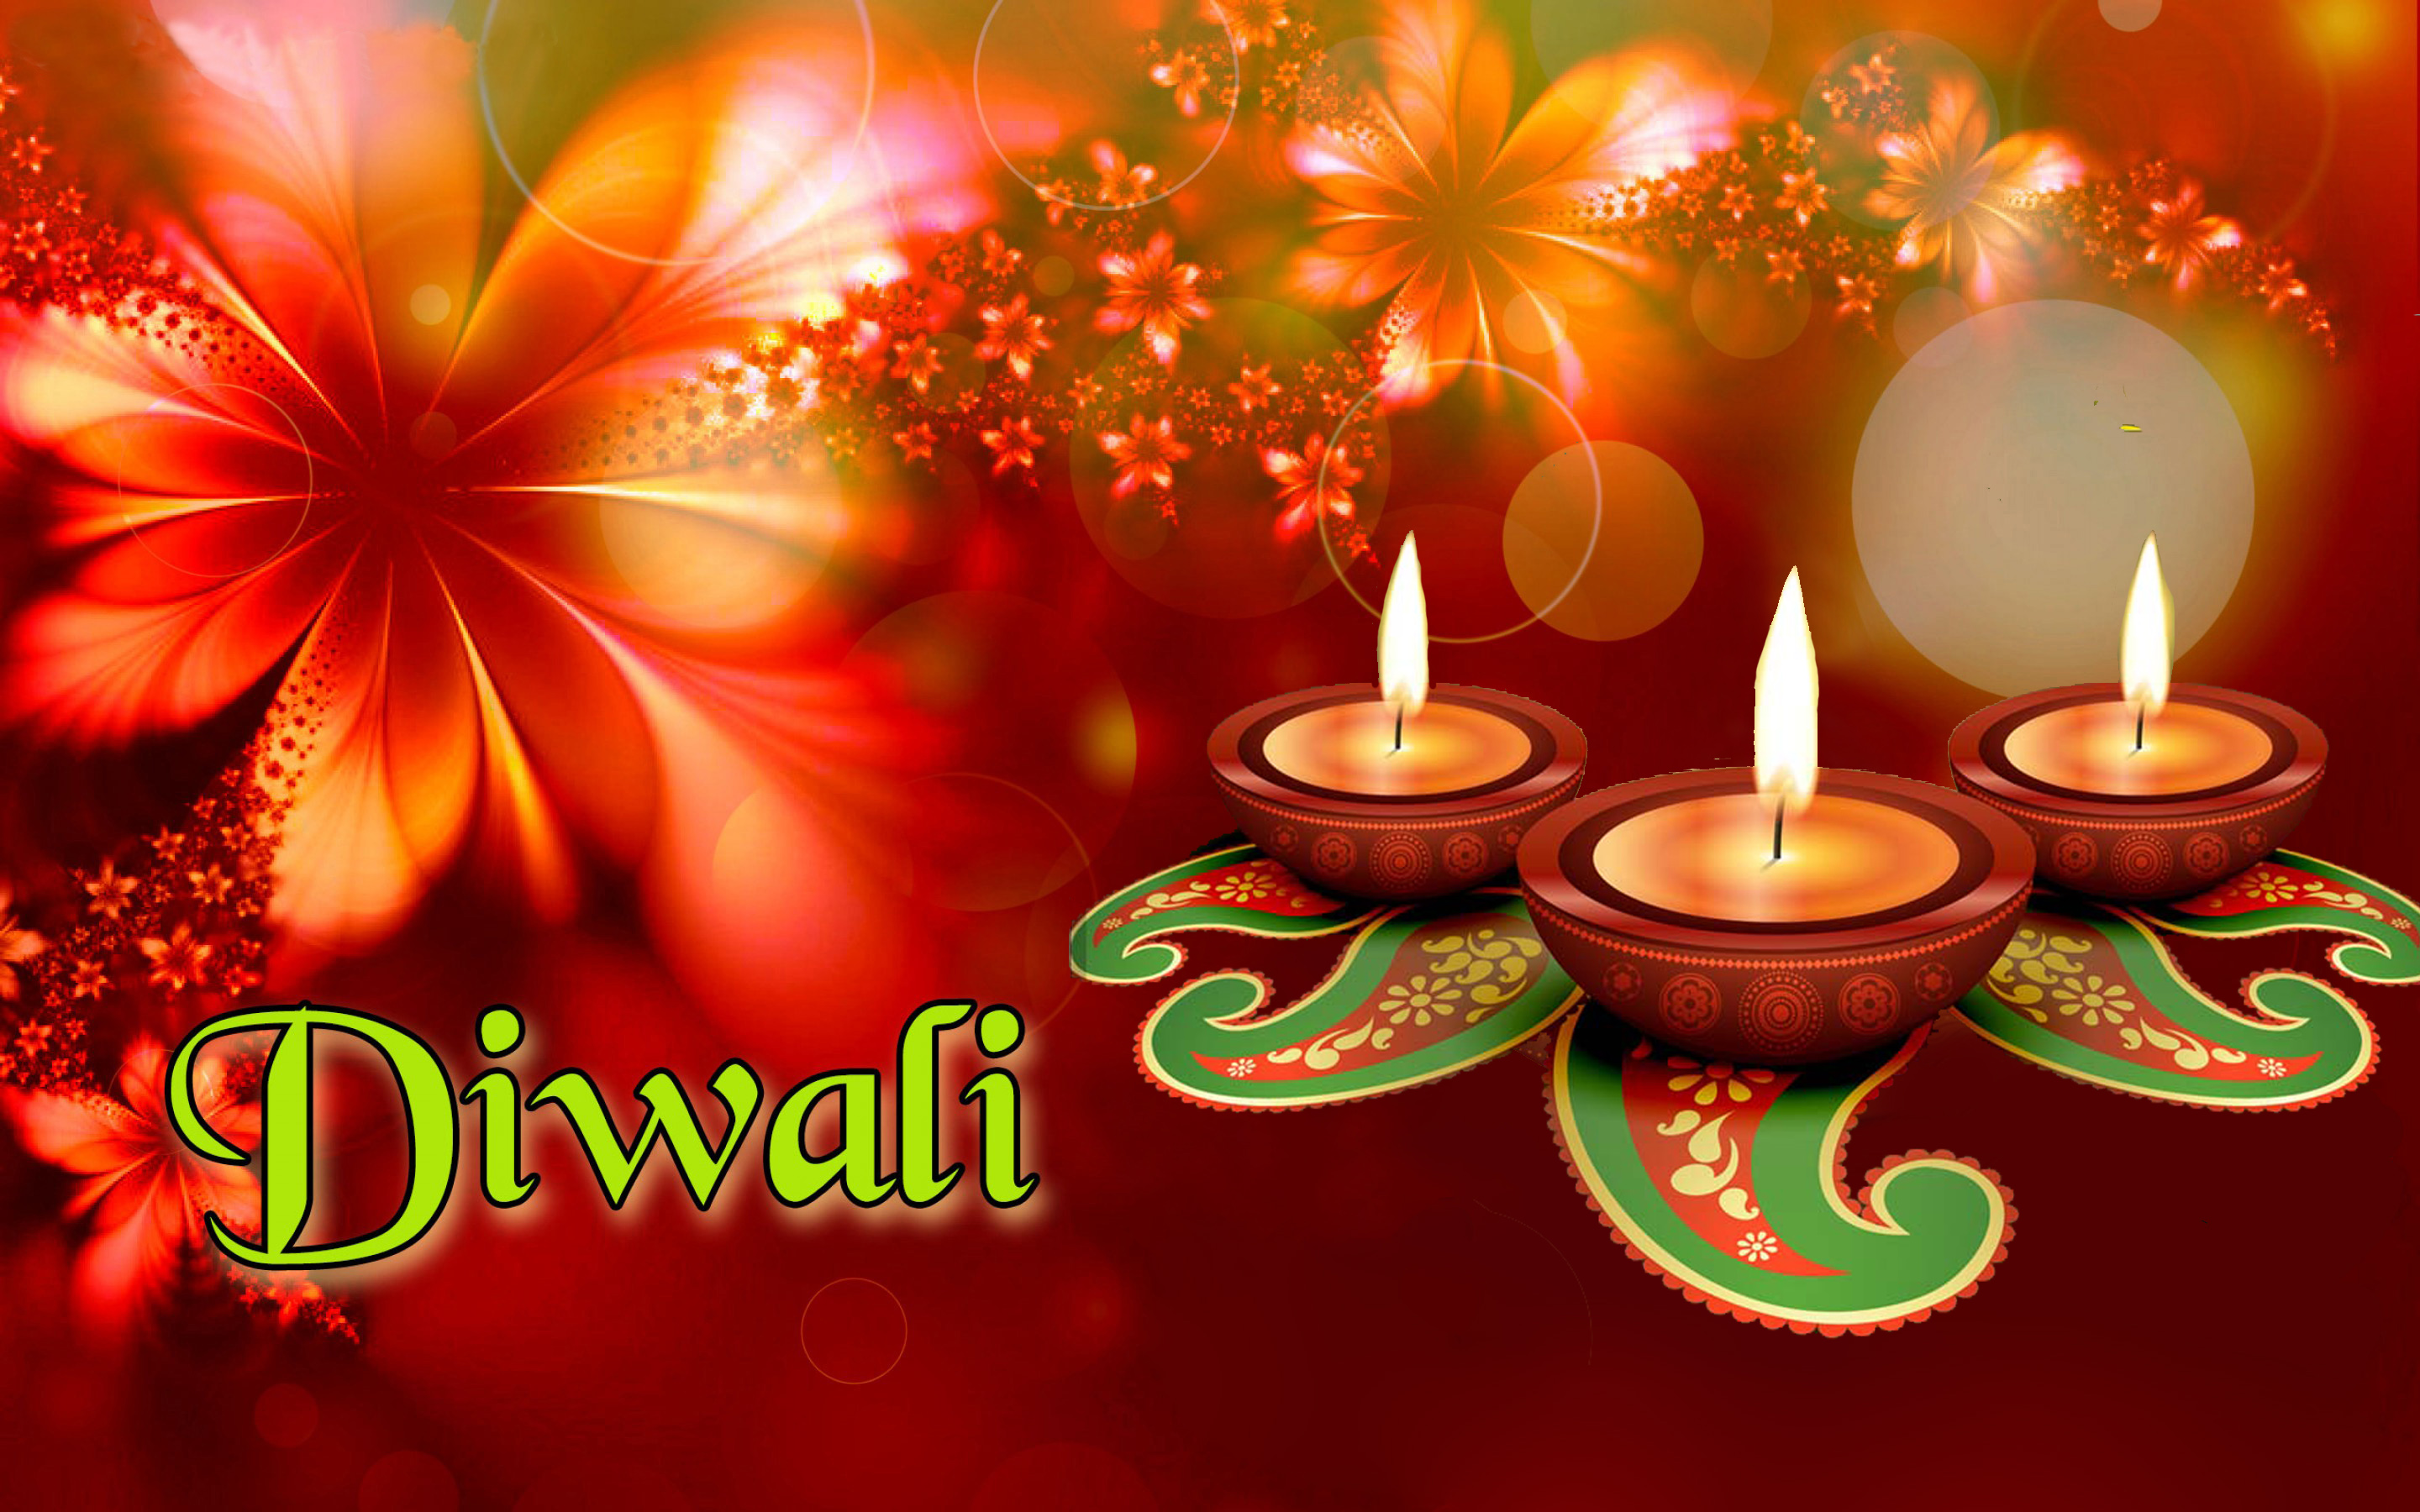 Greetings And Good Wishes Of Diwali Hd Desktop Backgrounds ...